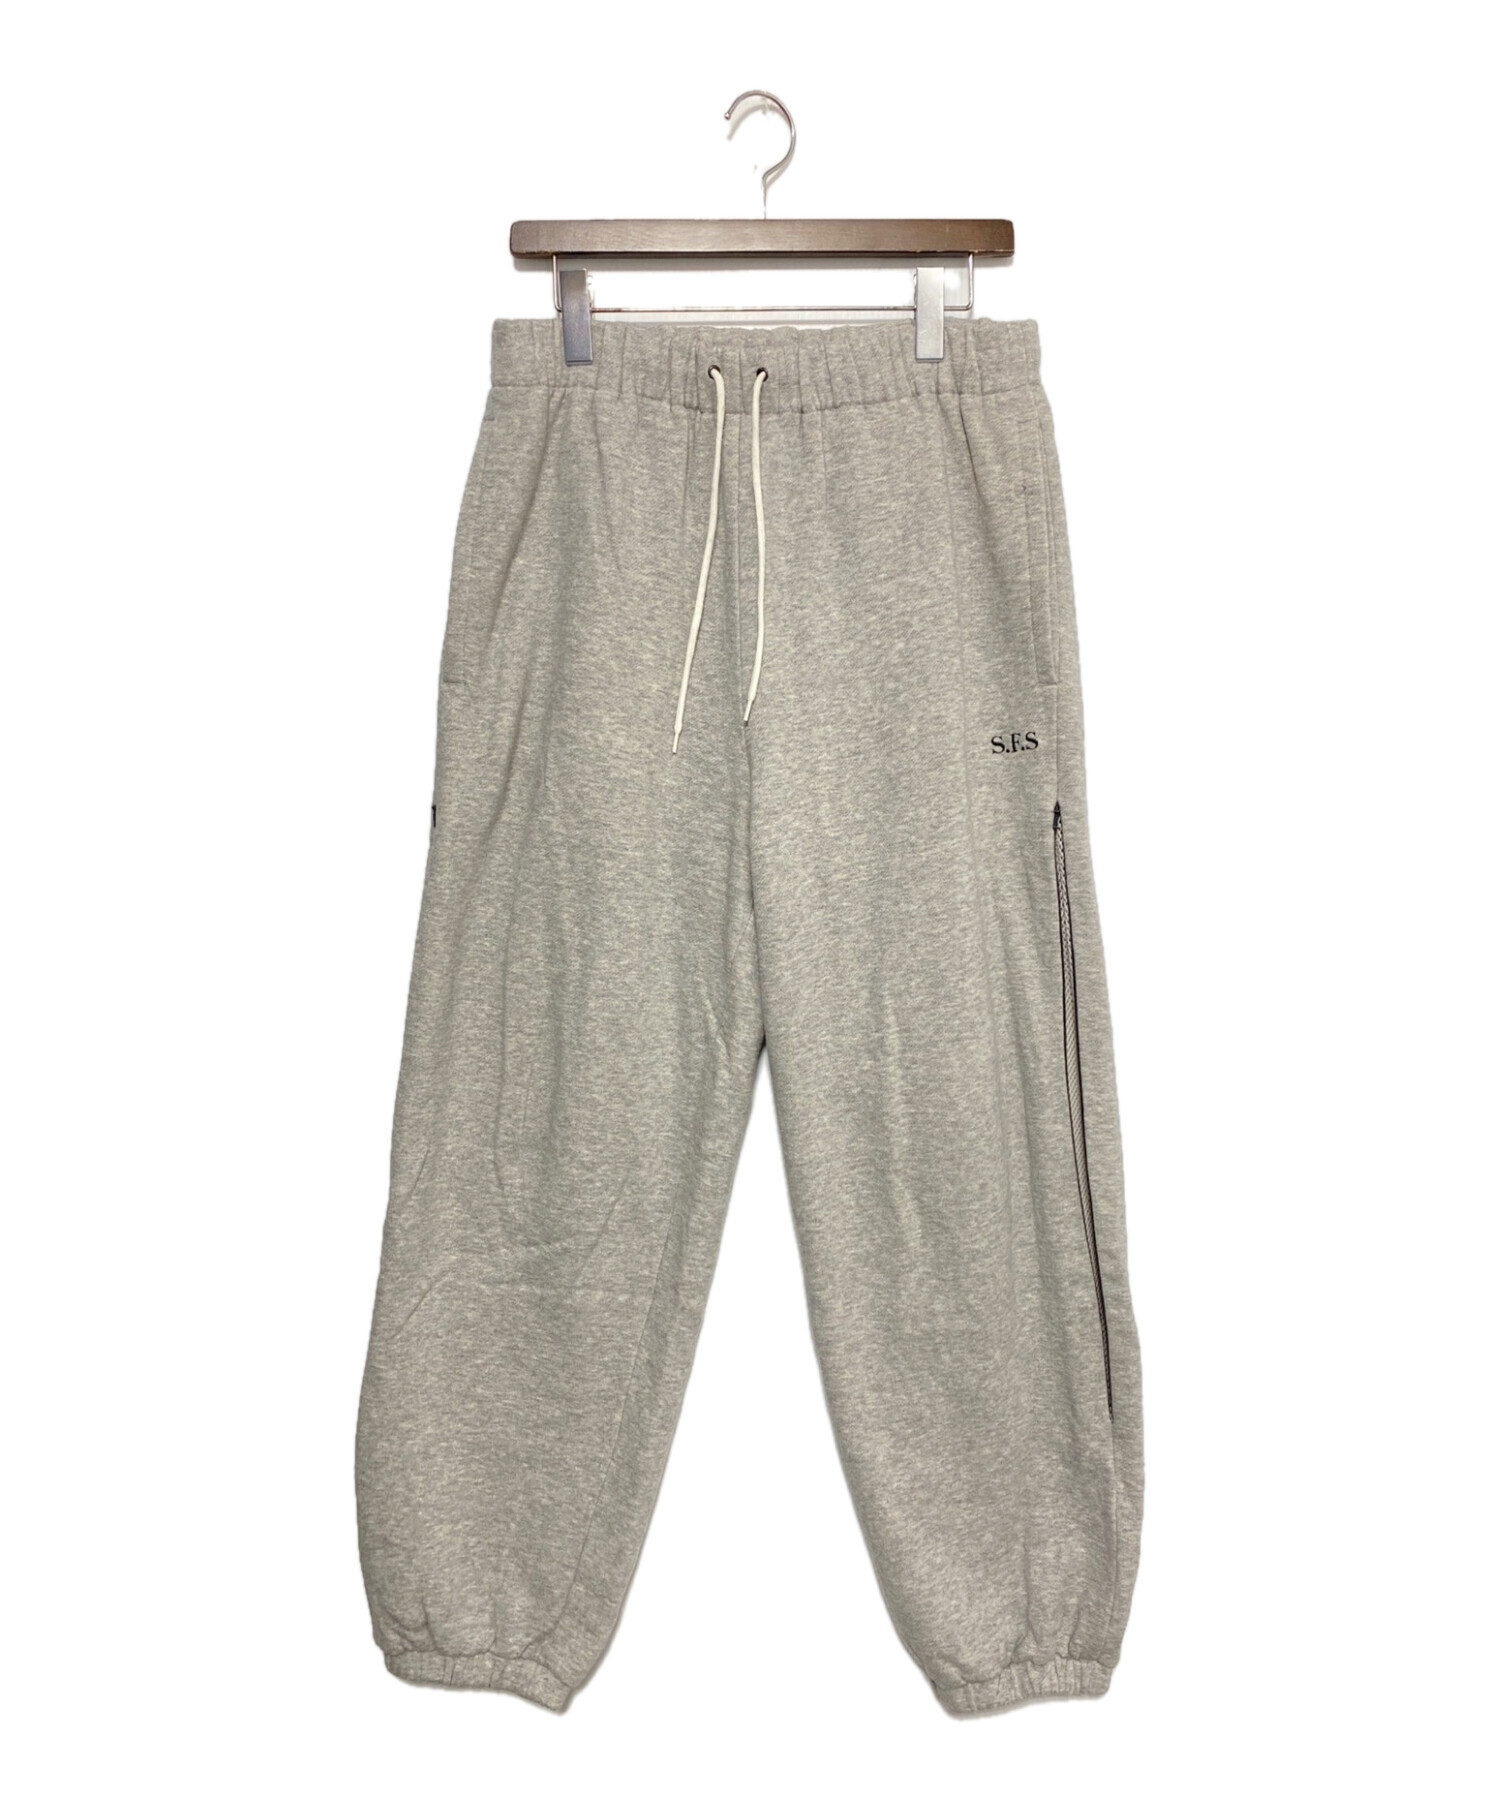 wakePrivate brand by S.F.S sweat pants 別注カラー - スウェット